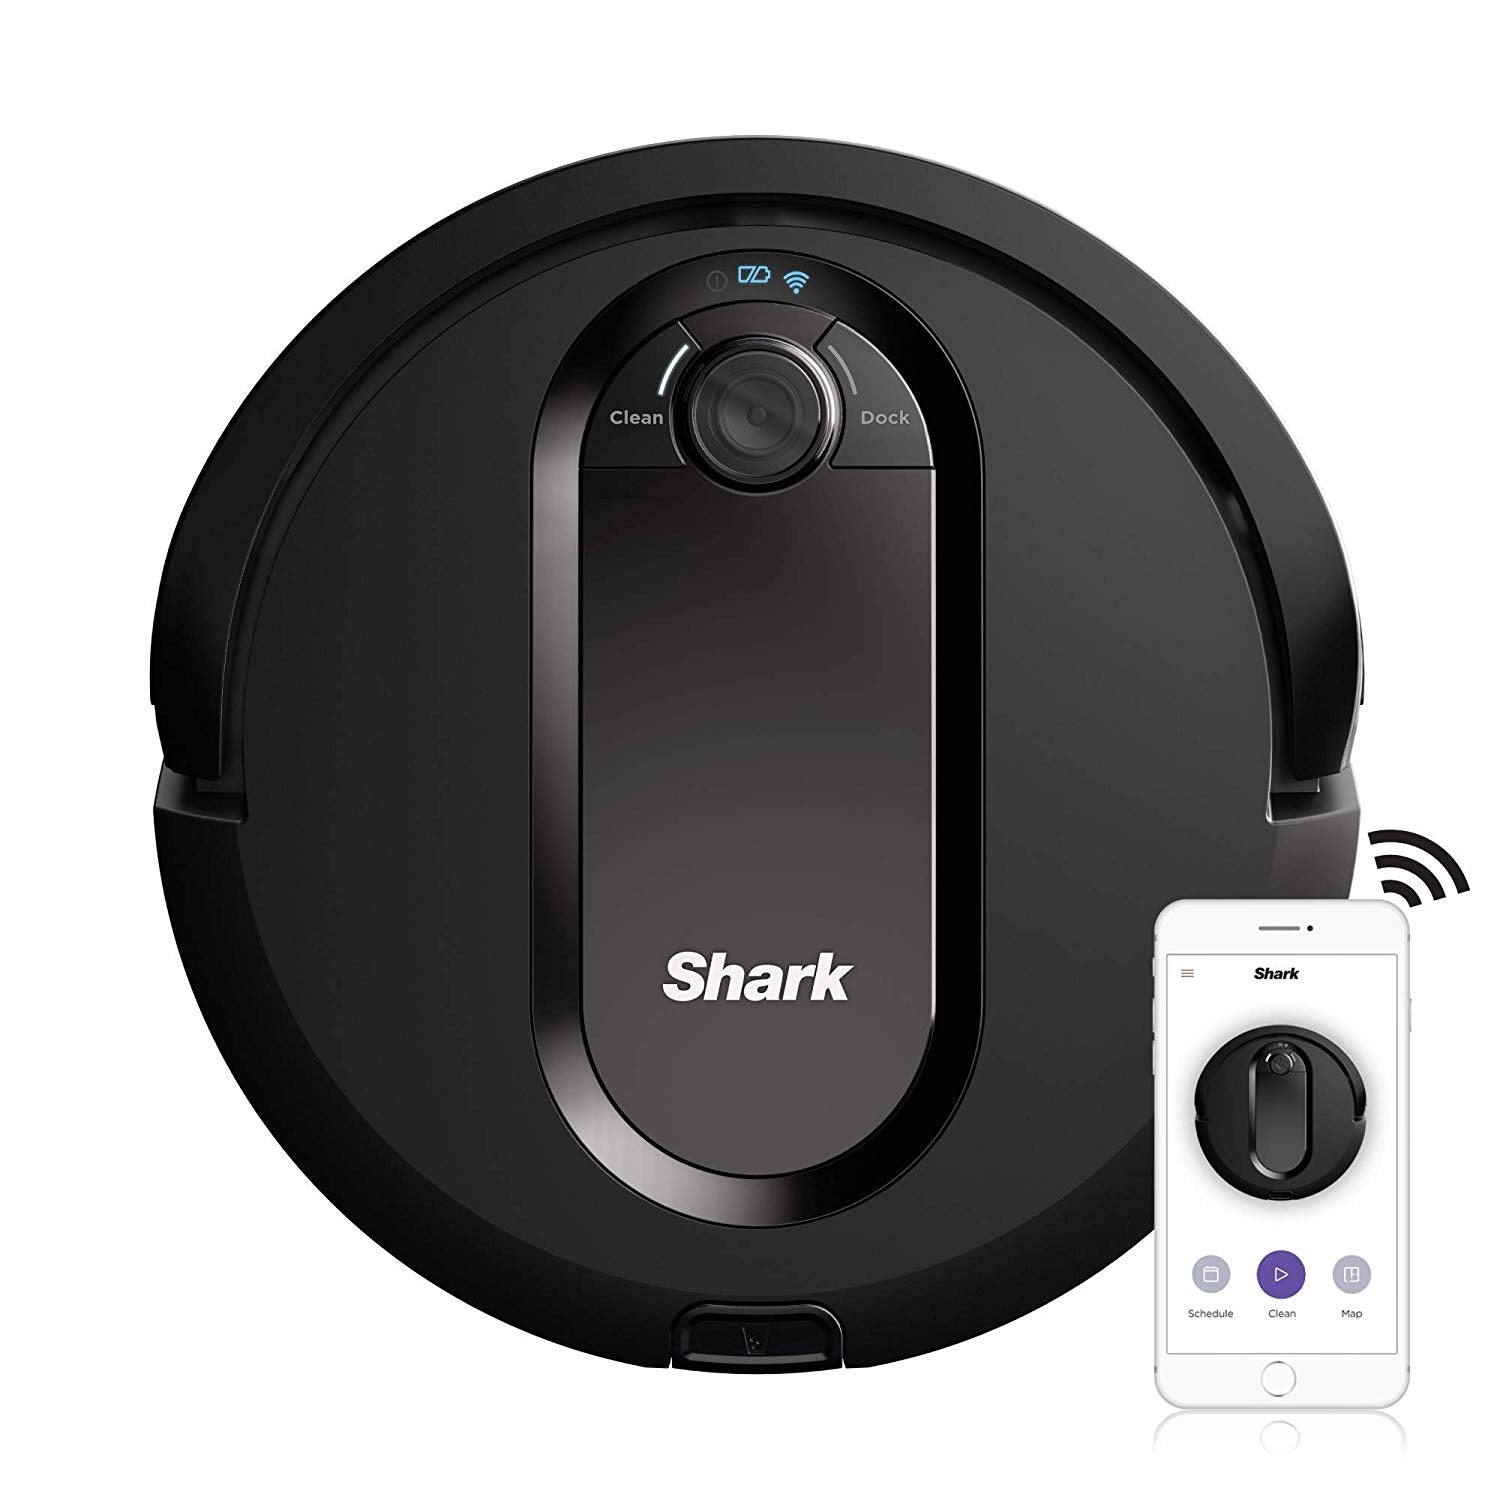 Shark IQ RV1001 Home Mapping Robot Vacuum Without Auto-Empty Dock - Black (Pre-Owned)